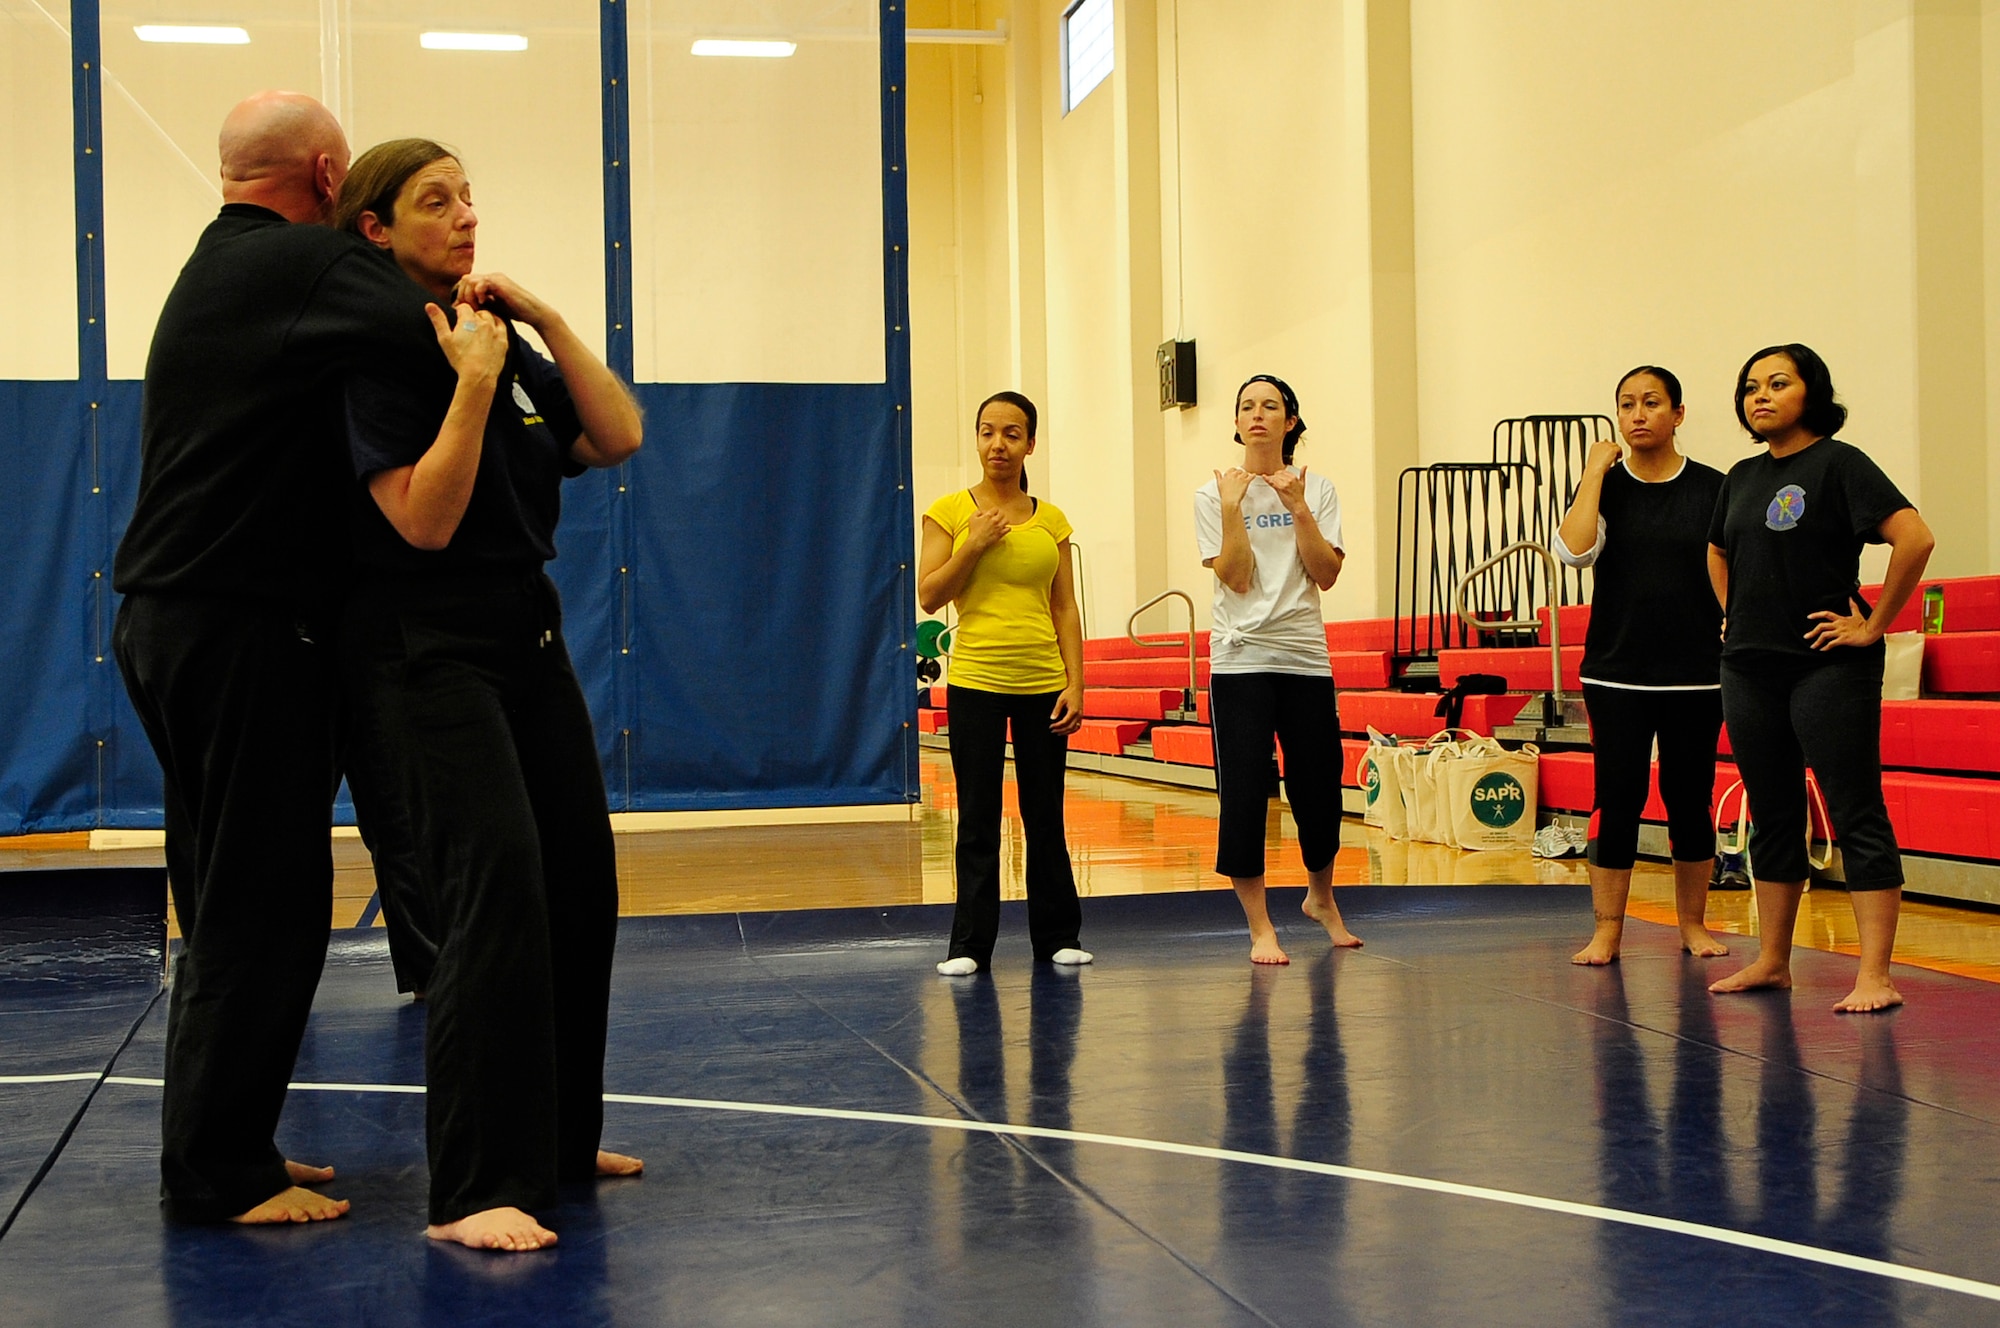 VANDENBERG AIR FORCE BASE, Calif. -- Mike Myers and Valerie Pallani, Jiu-Jitsu instructors, demonstrate an escape technique during a self-defense class at the Fitness Center here Friday, April 20, 2012. The class was sponsored by the 30th Space Wing Sexual Assault Prevention and Response office in conjunction with Sexual Assault Awareness Month. (U.S. Air Force photo/Michael Peterson)